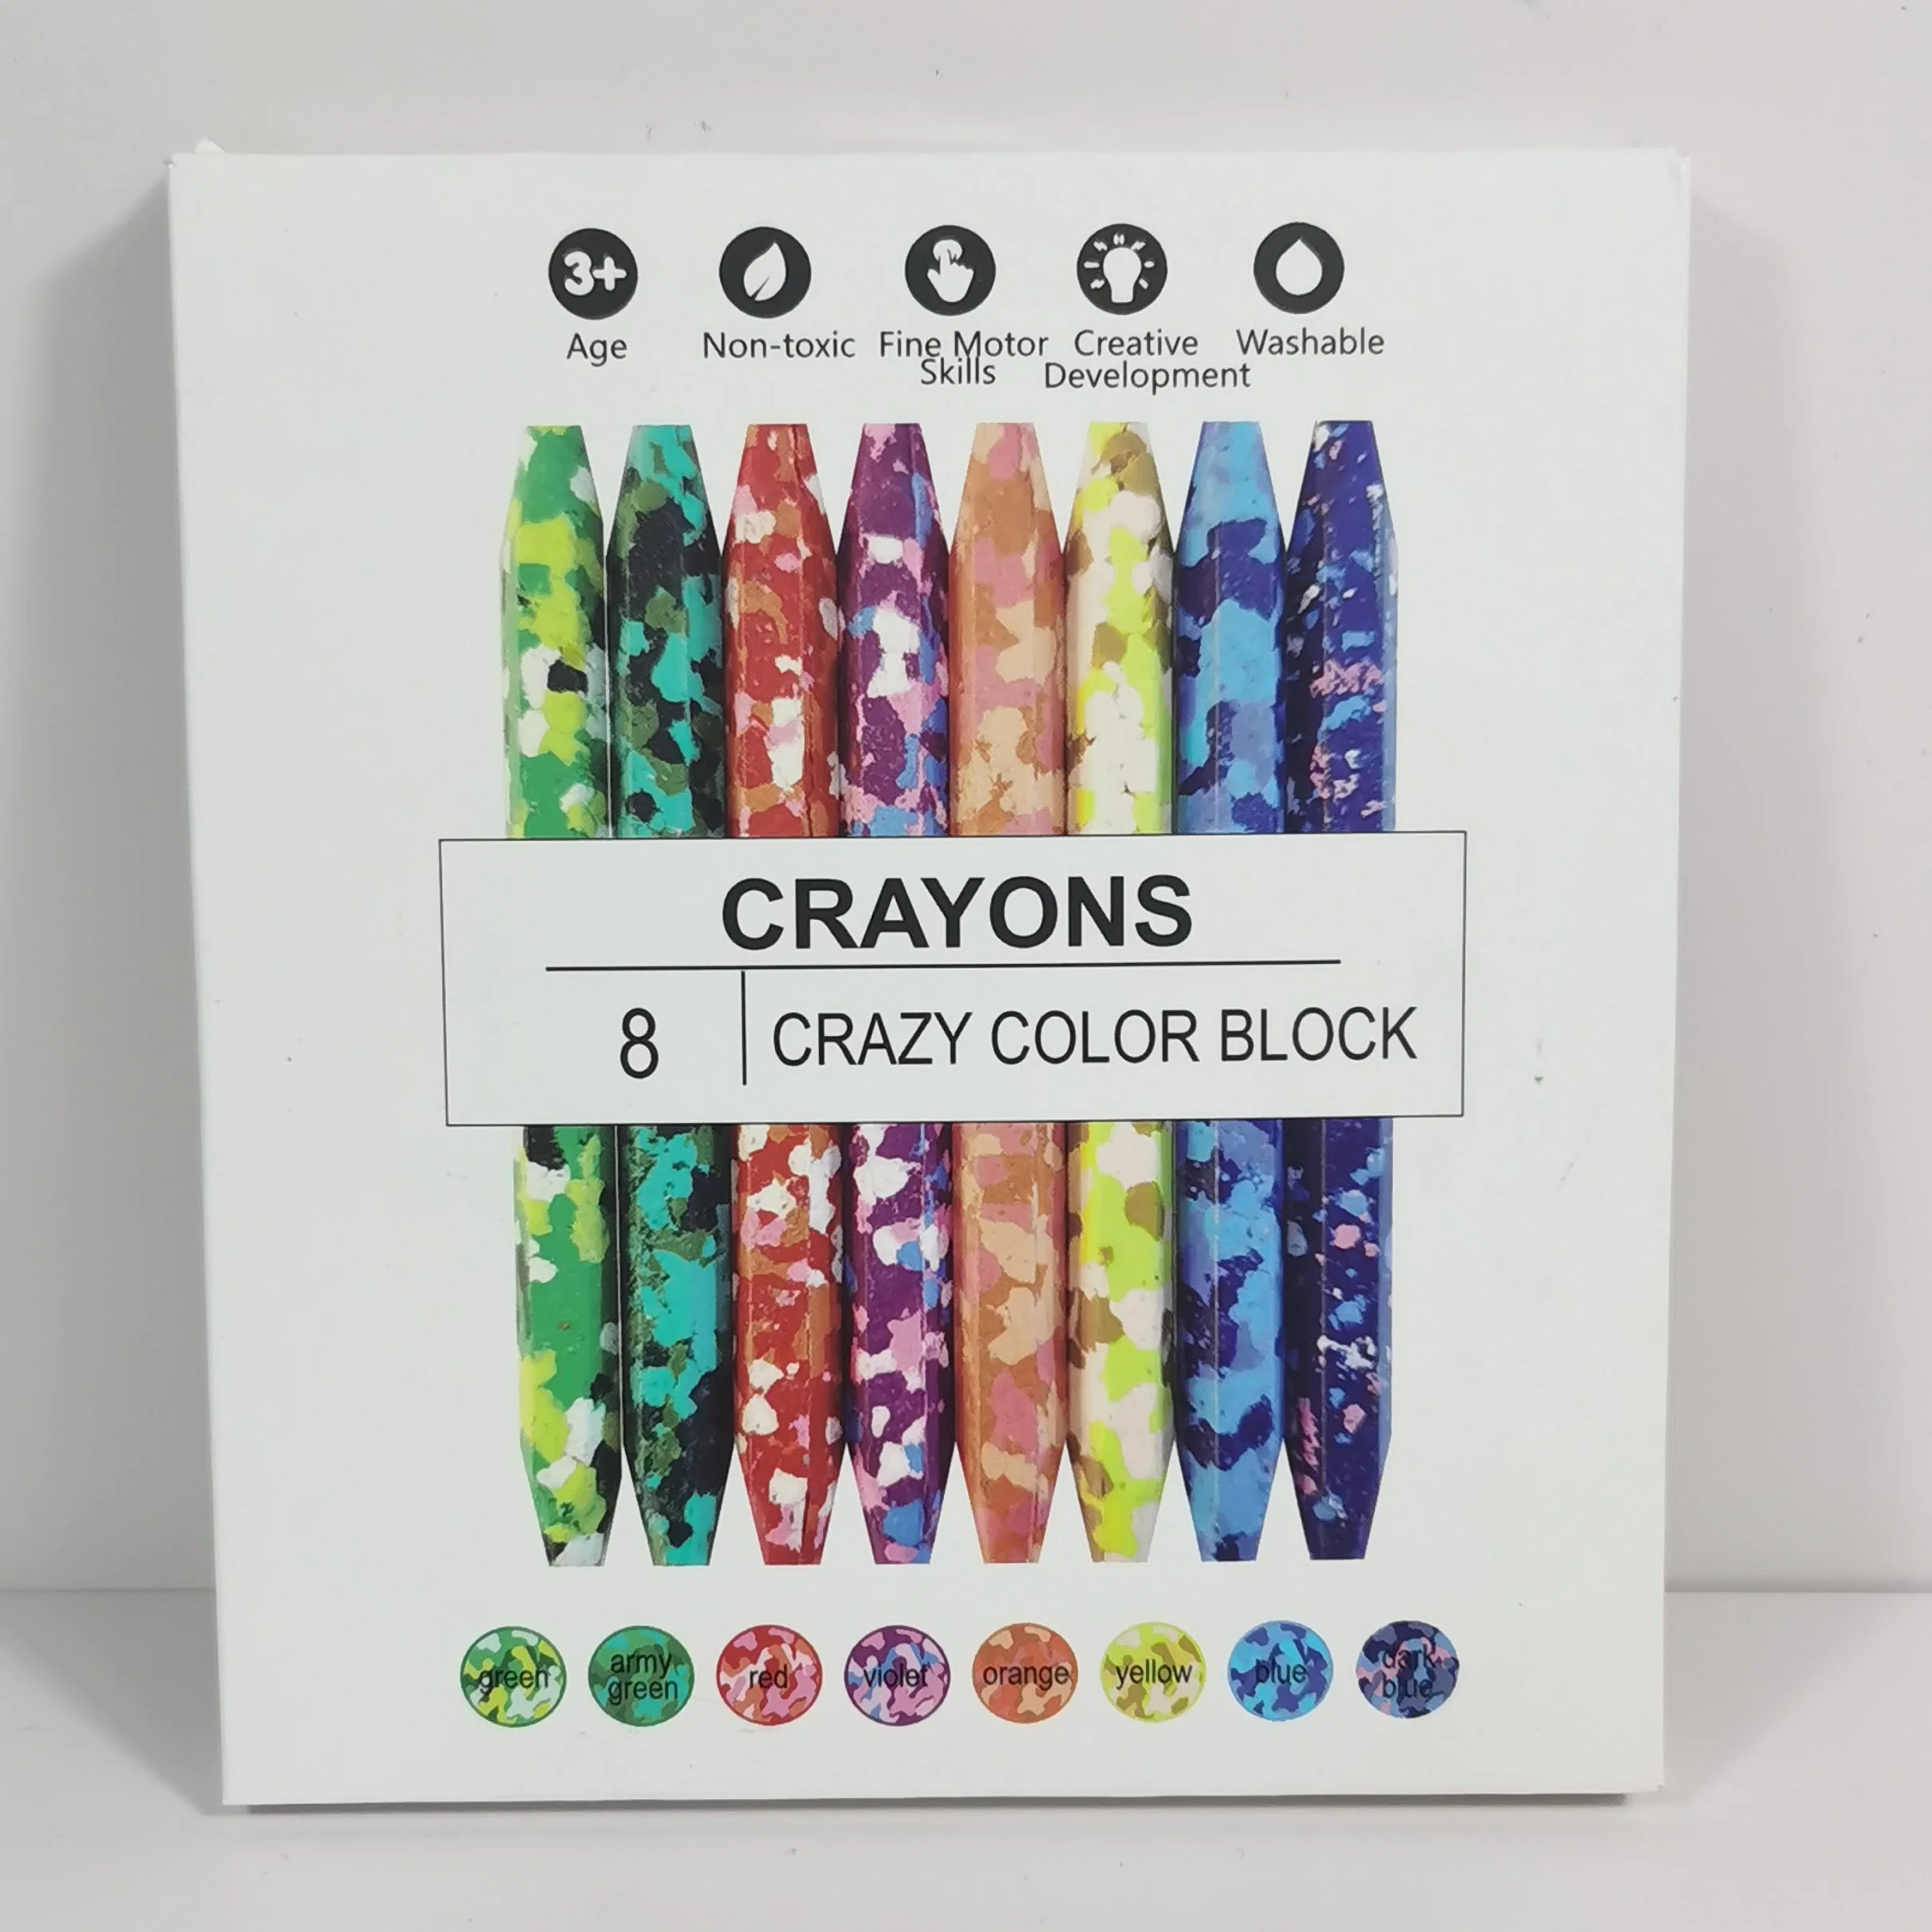 Giant Crazy Crayon All-in-One Non Toxic Kids Crafts Art Supplies Easy to Hold